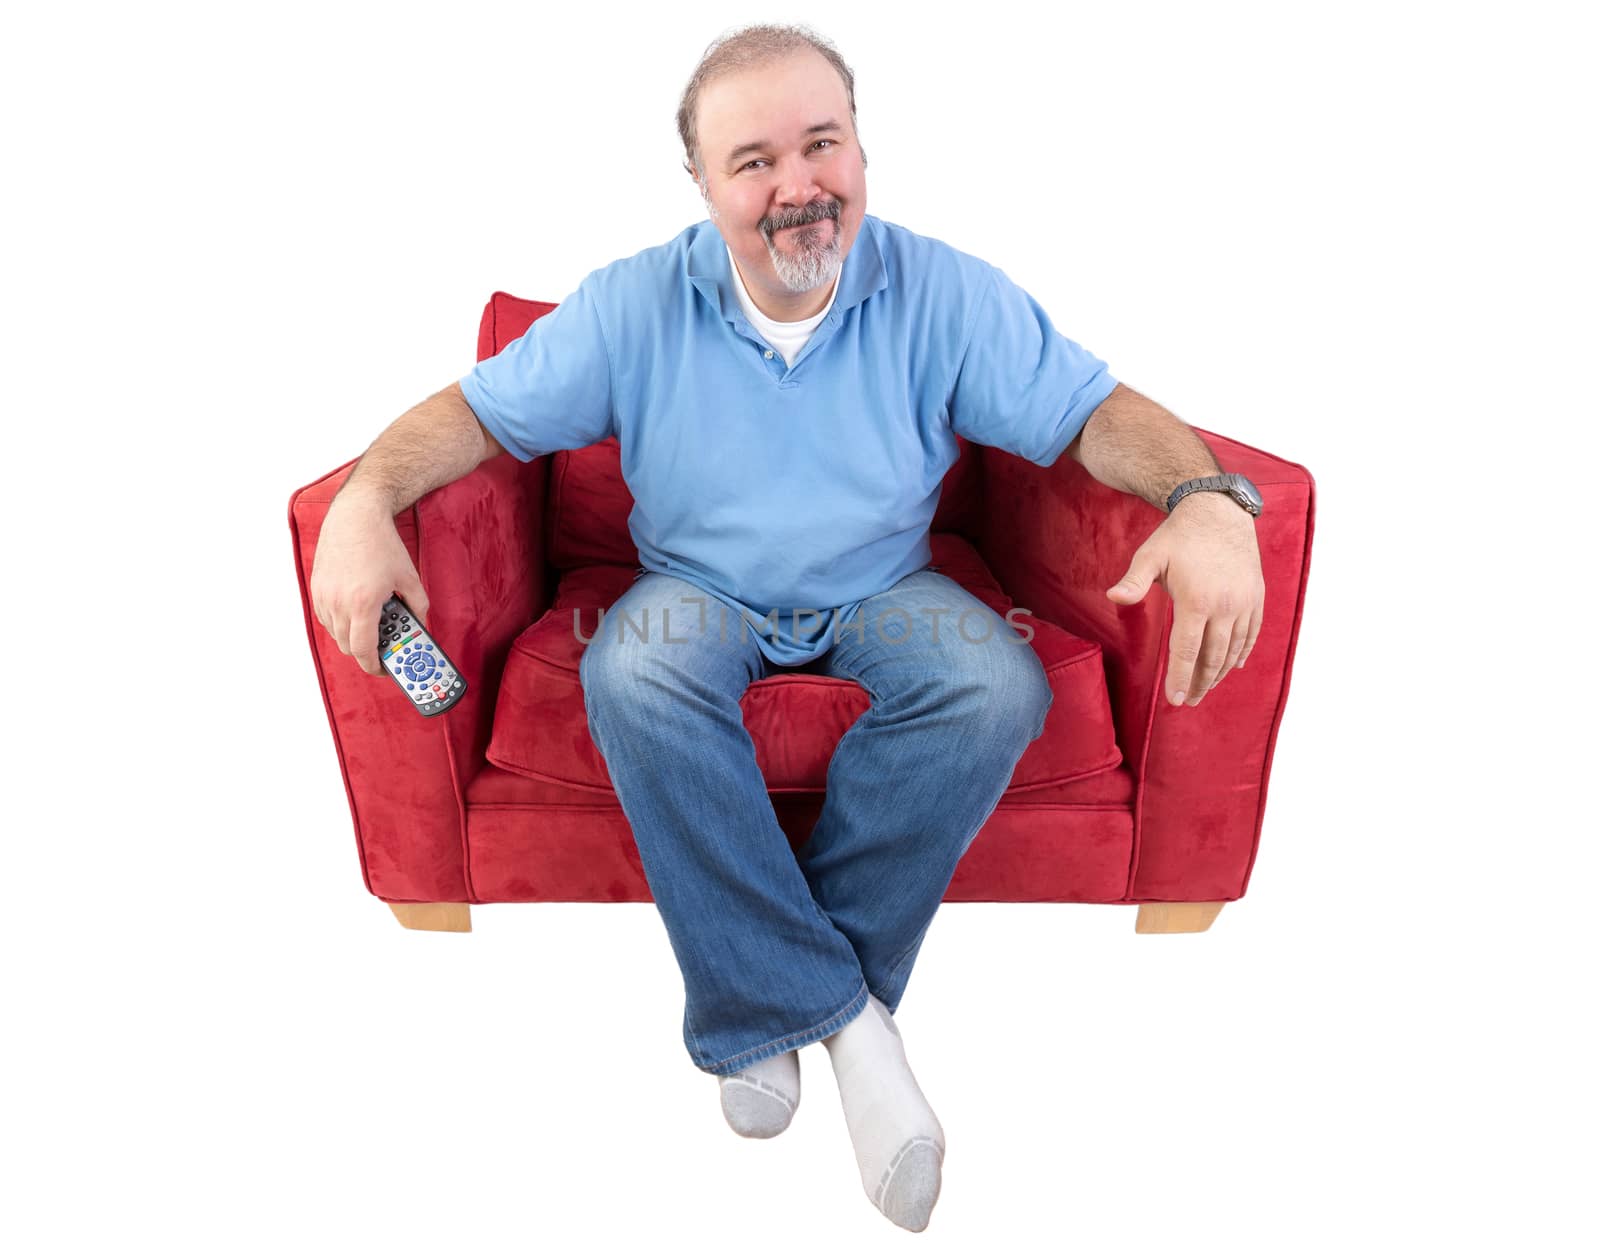 Man sitting in a comfortable armchair with a remote control and a bored expression as he watches something on television that he has seen before